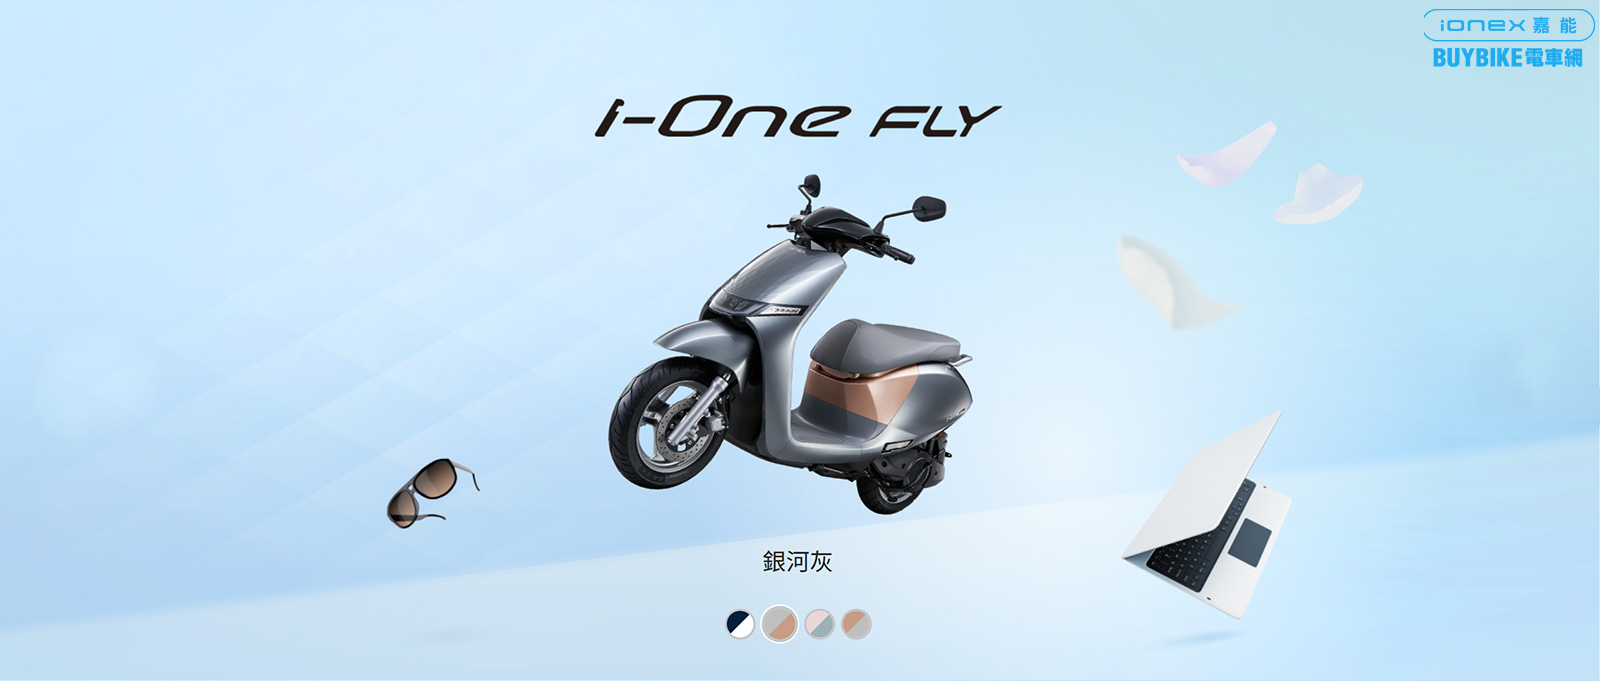 ione-fly-pic_11